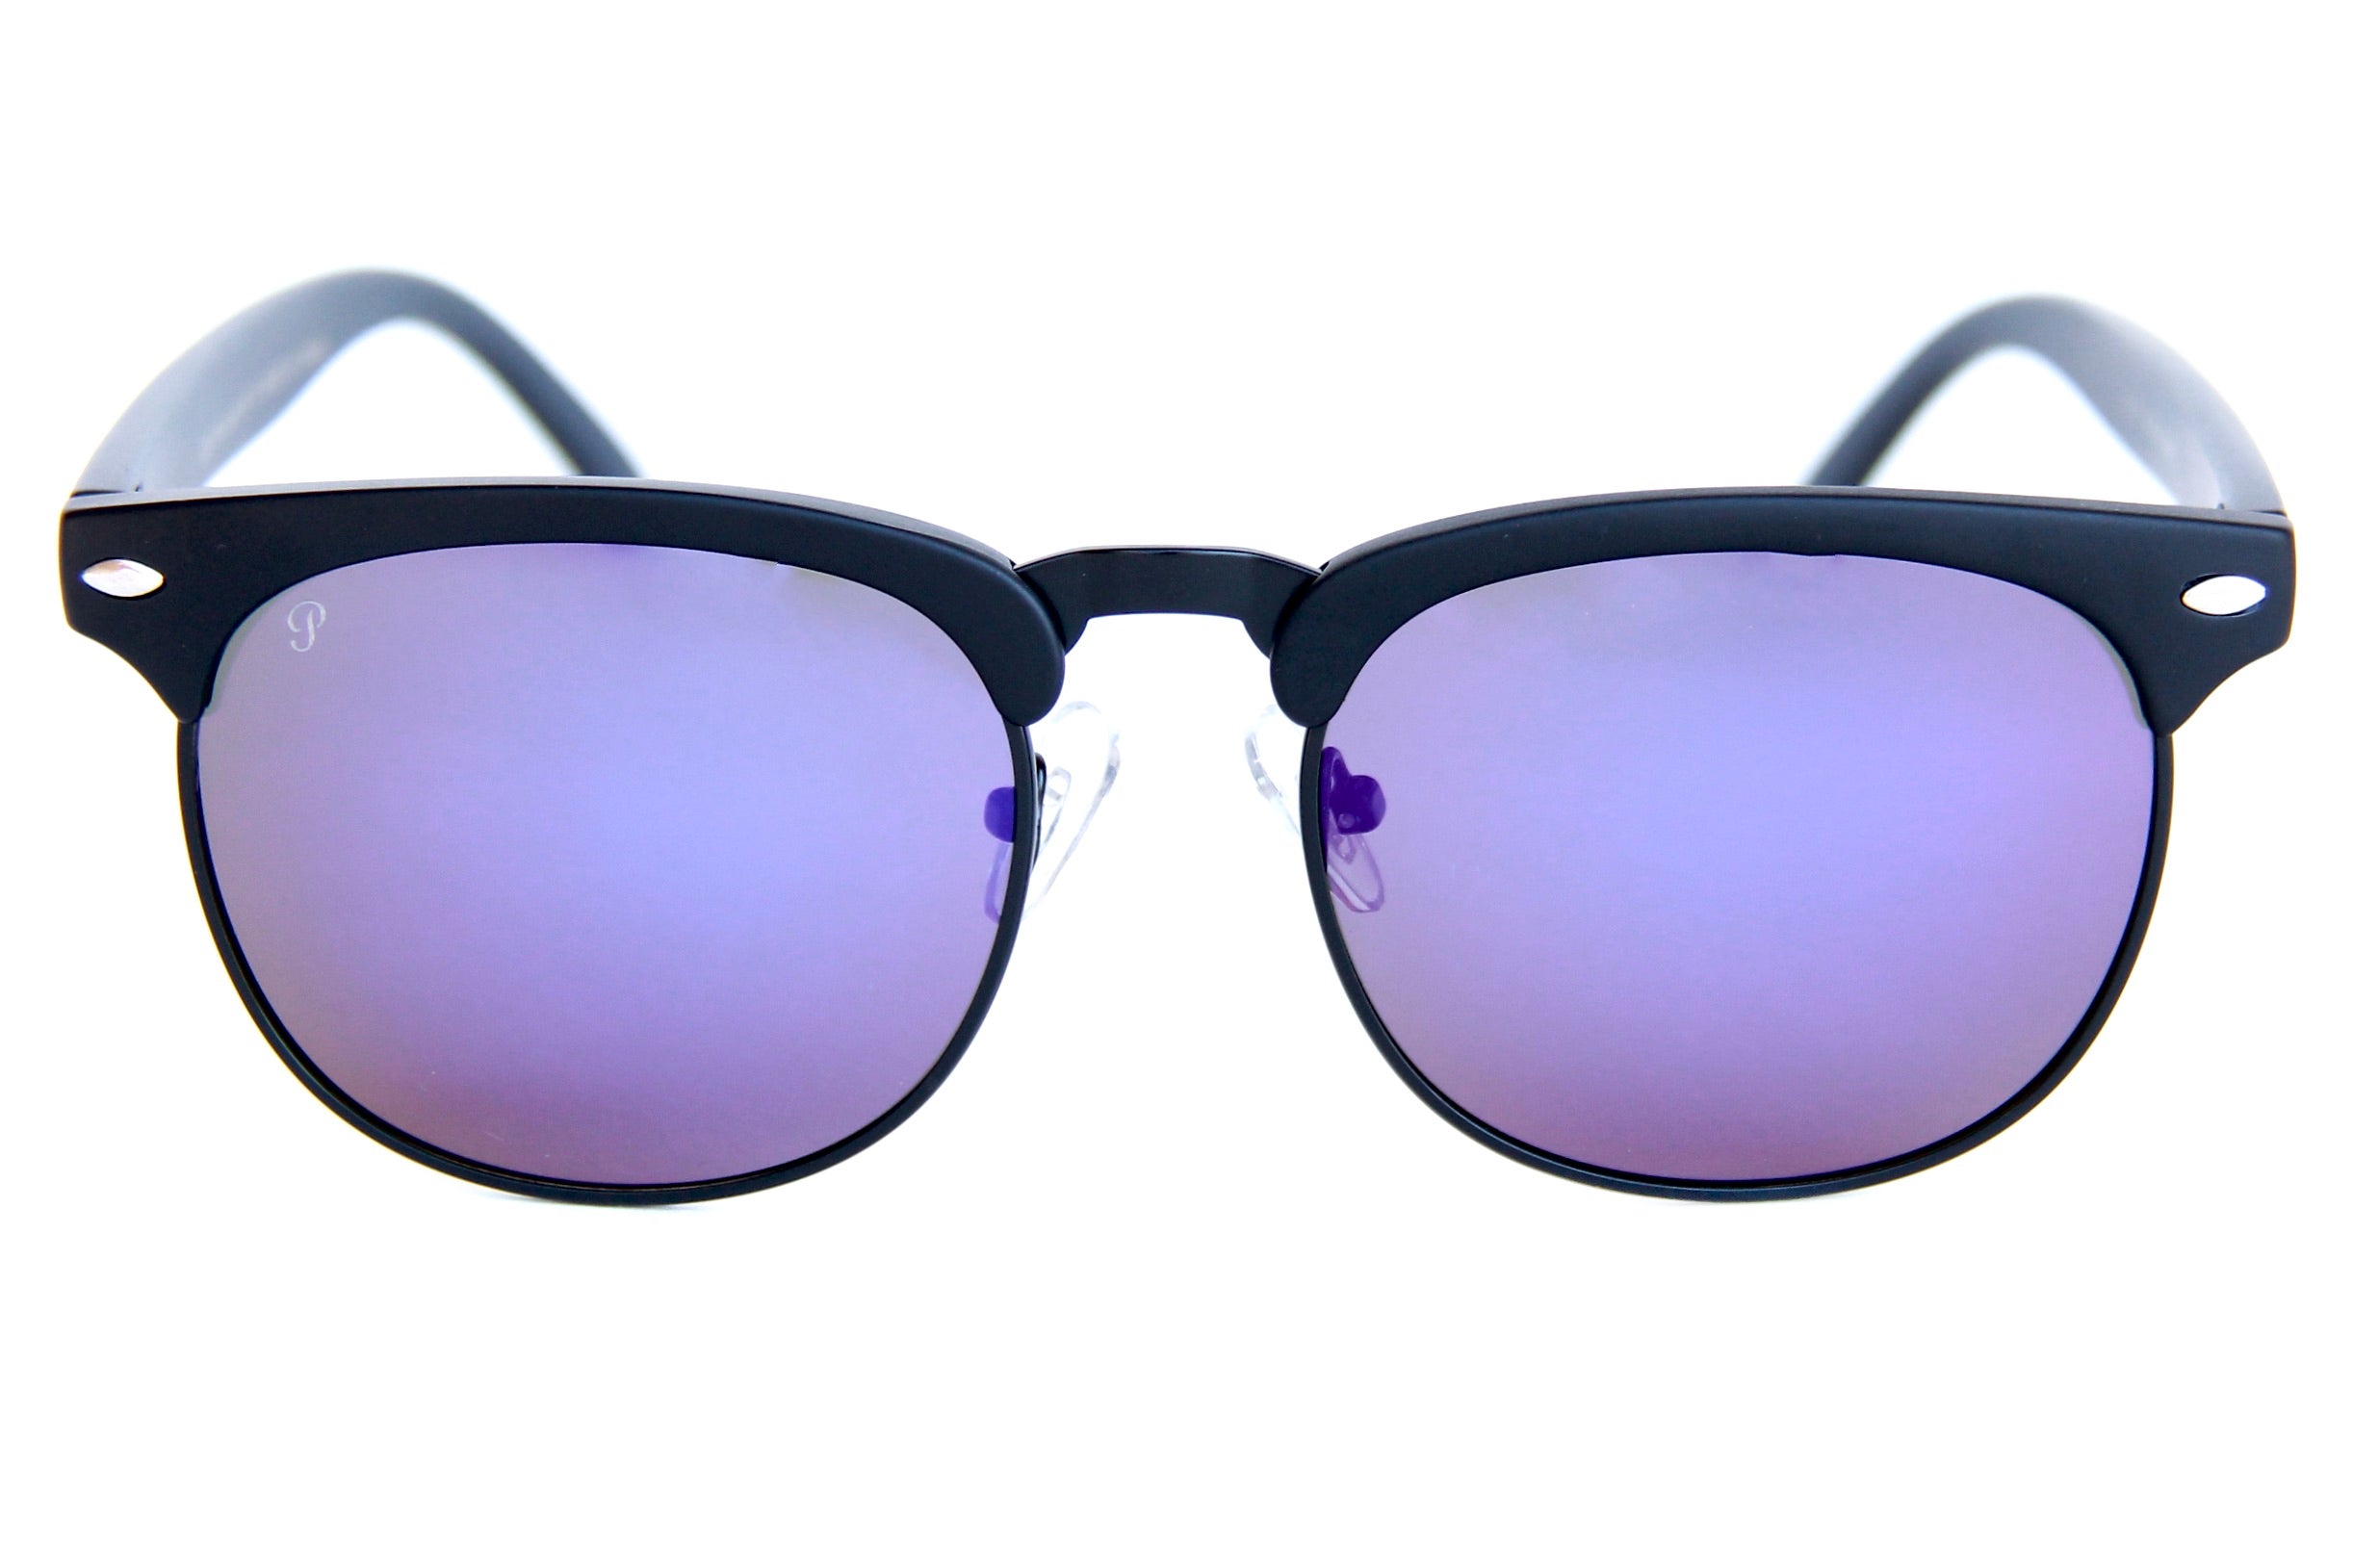 Mirrored vs. Polarized Sunglasses: Which Style Is Better?